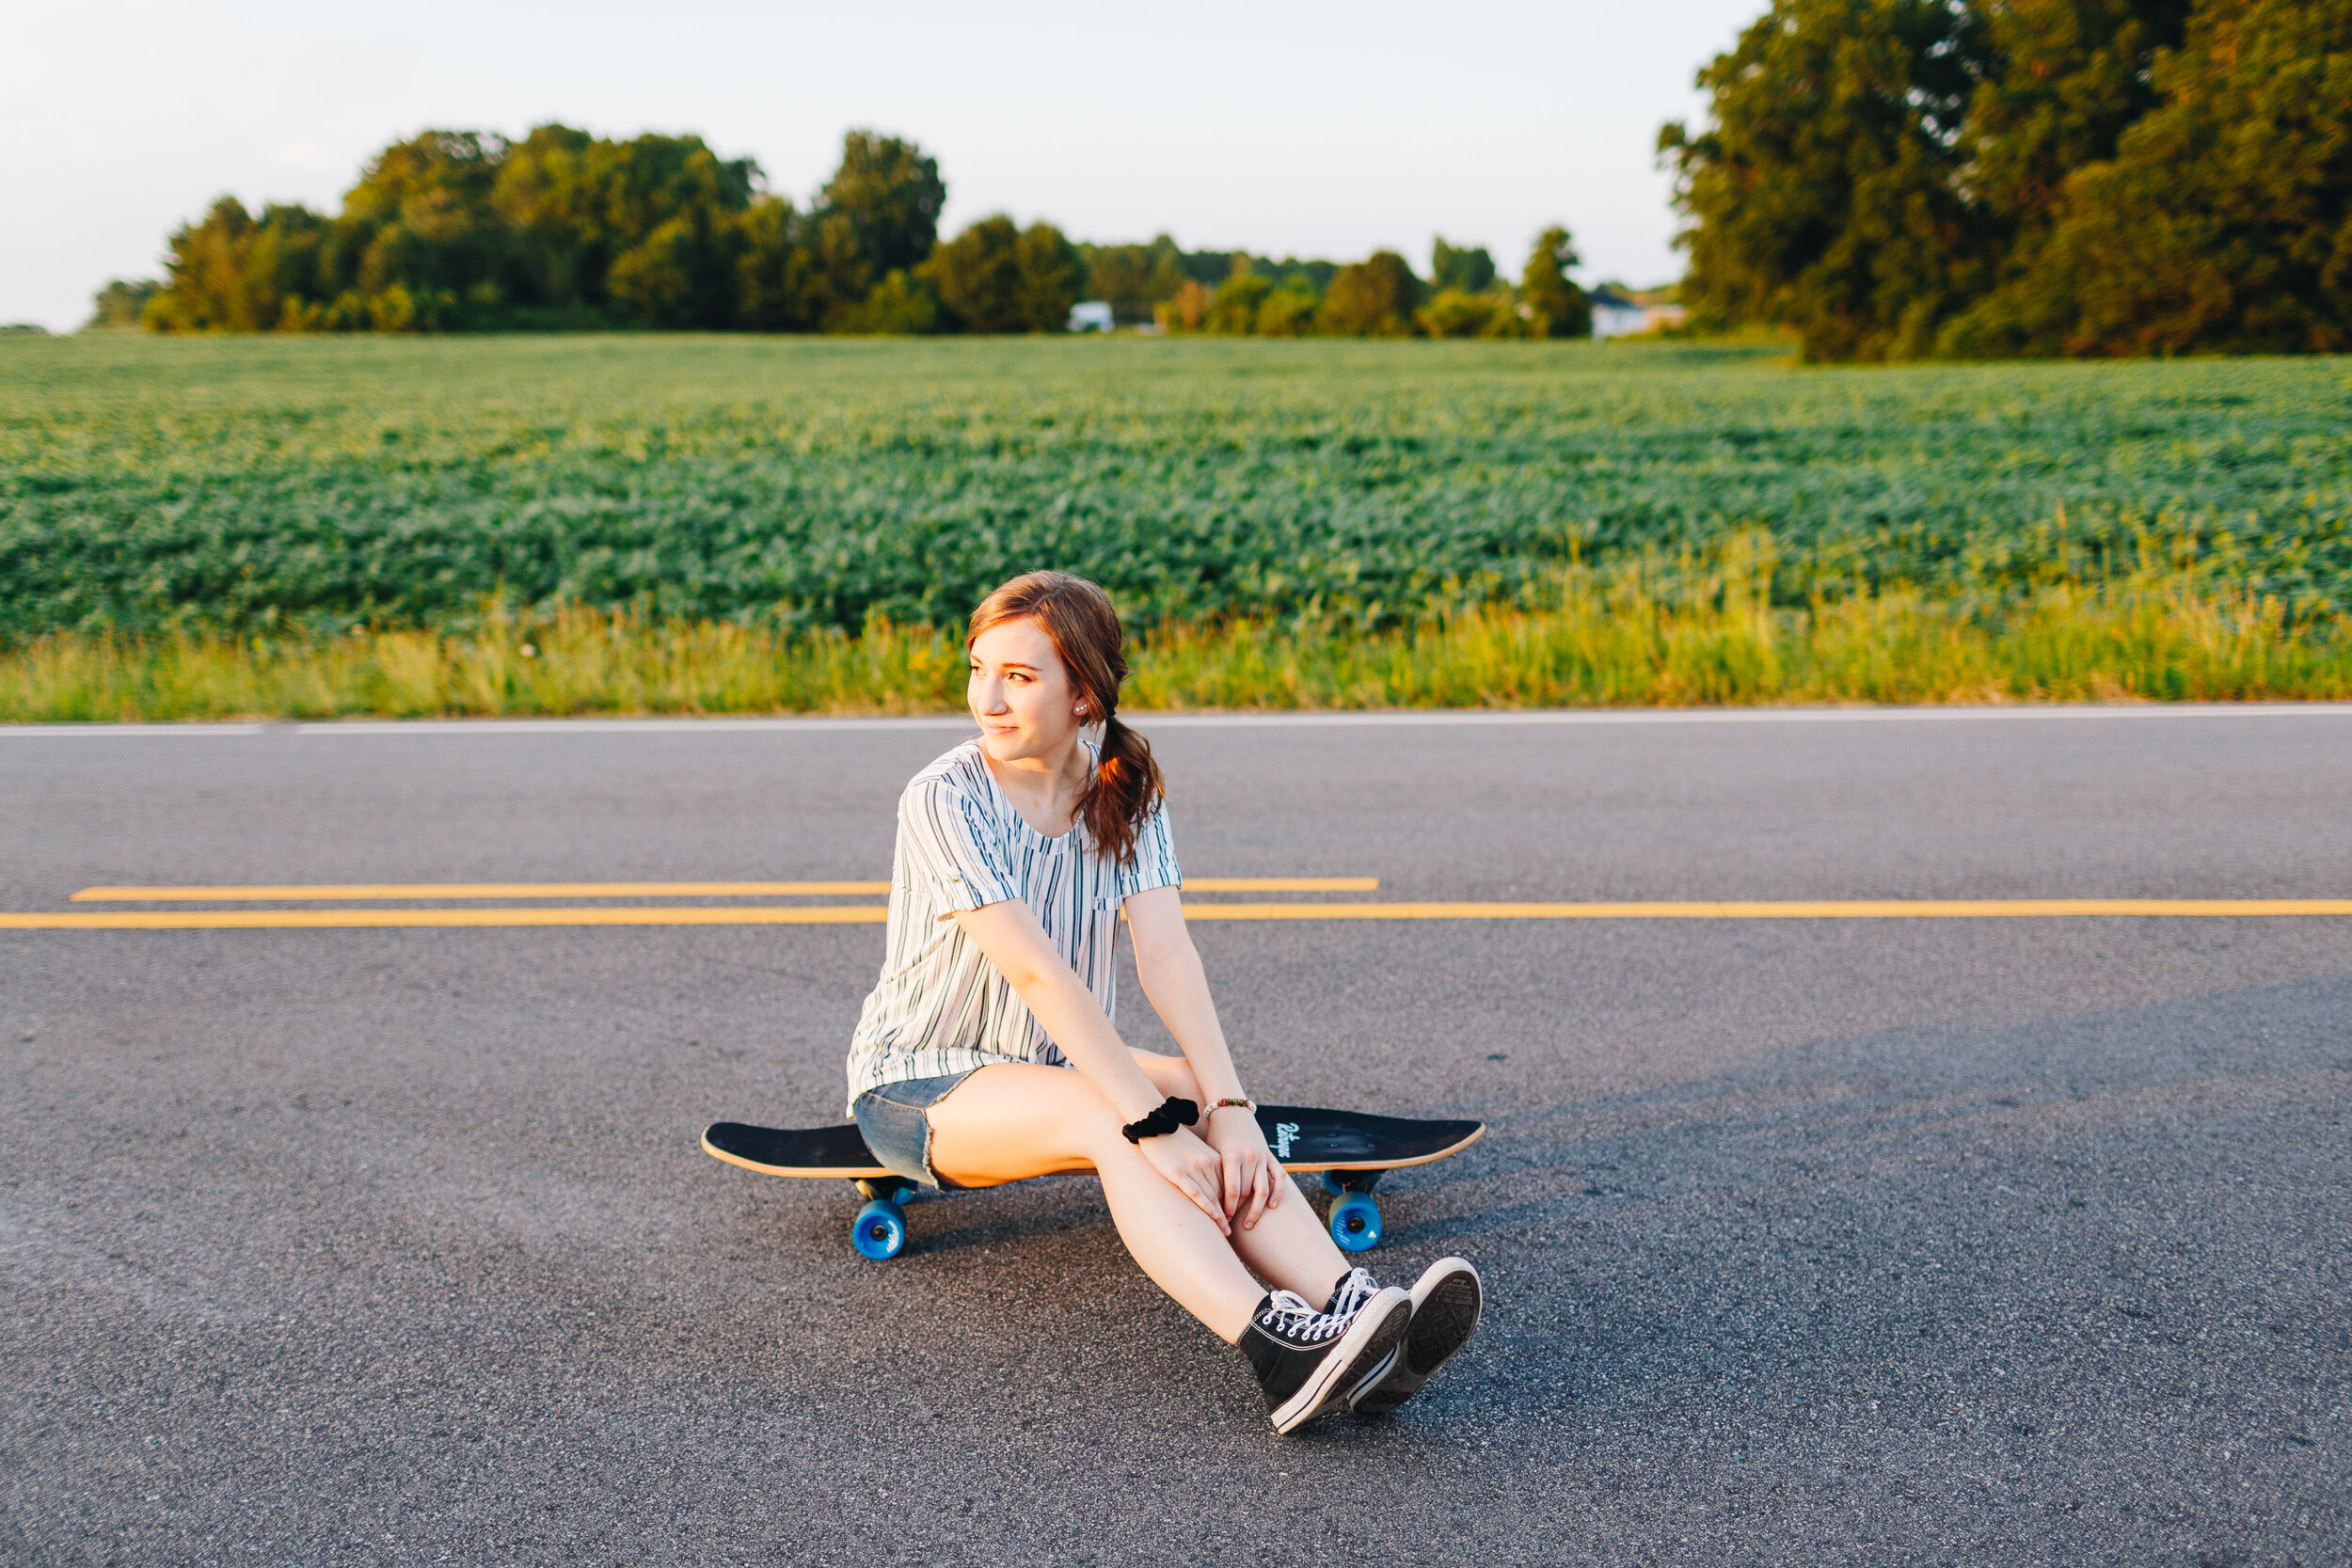 Longboarding portraits in country